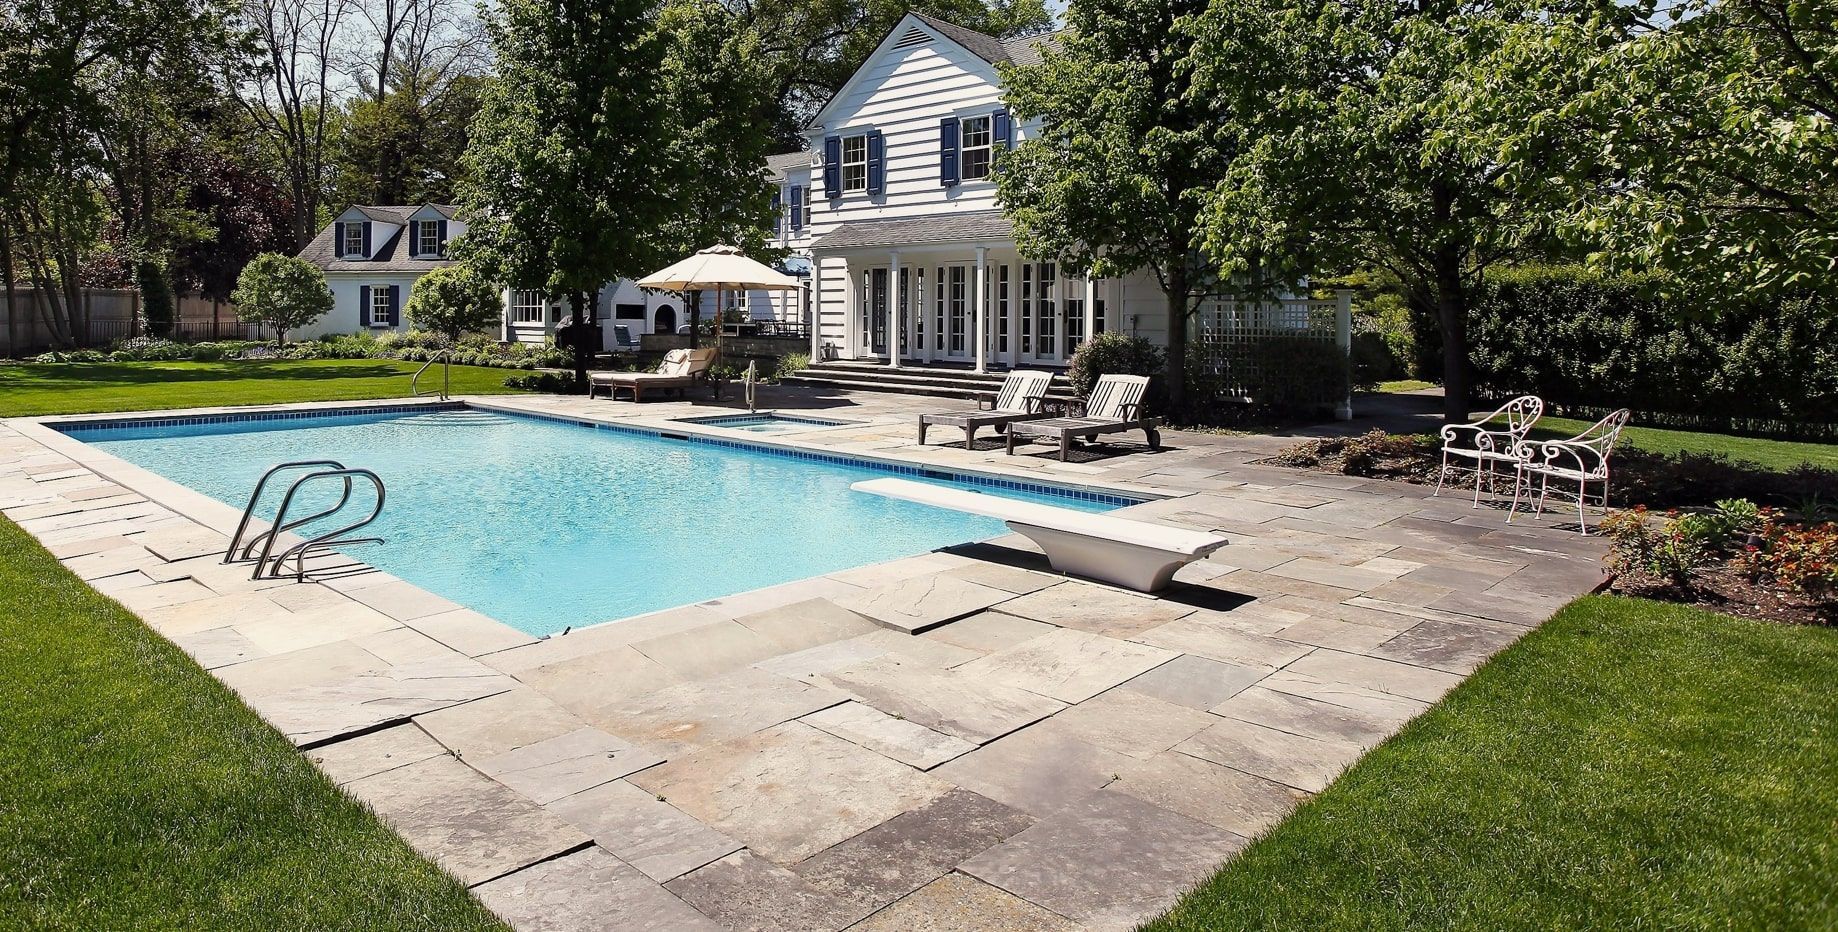 Concrete pool deck renovation in Holland residential area